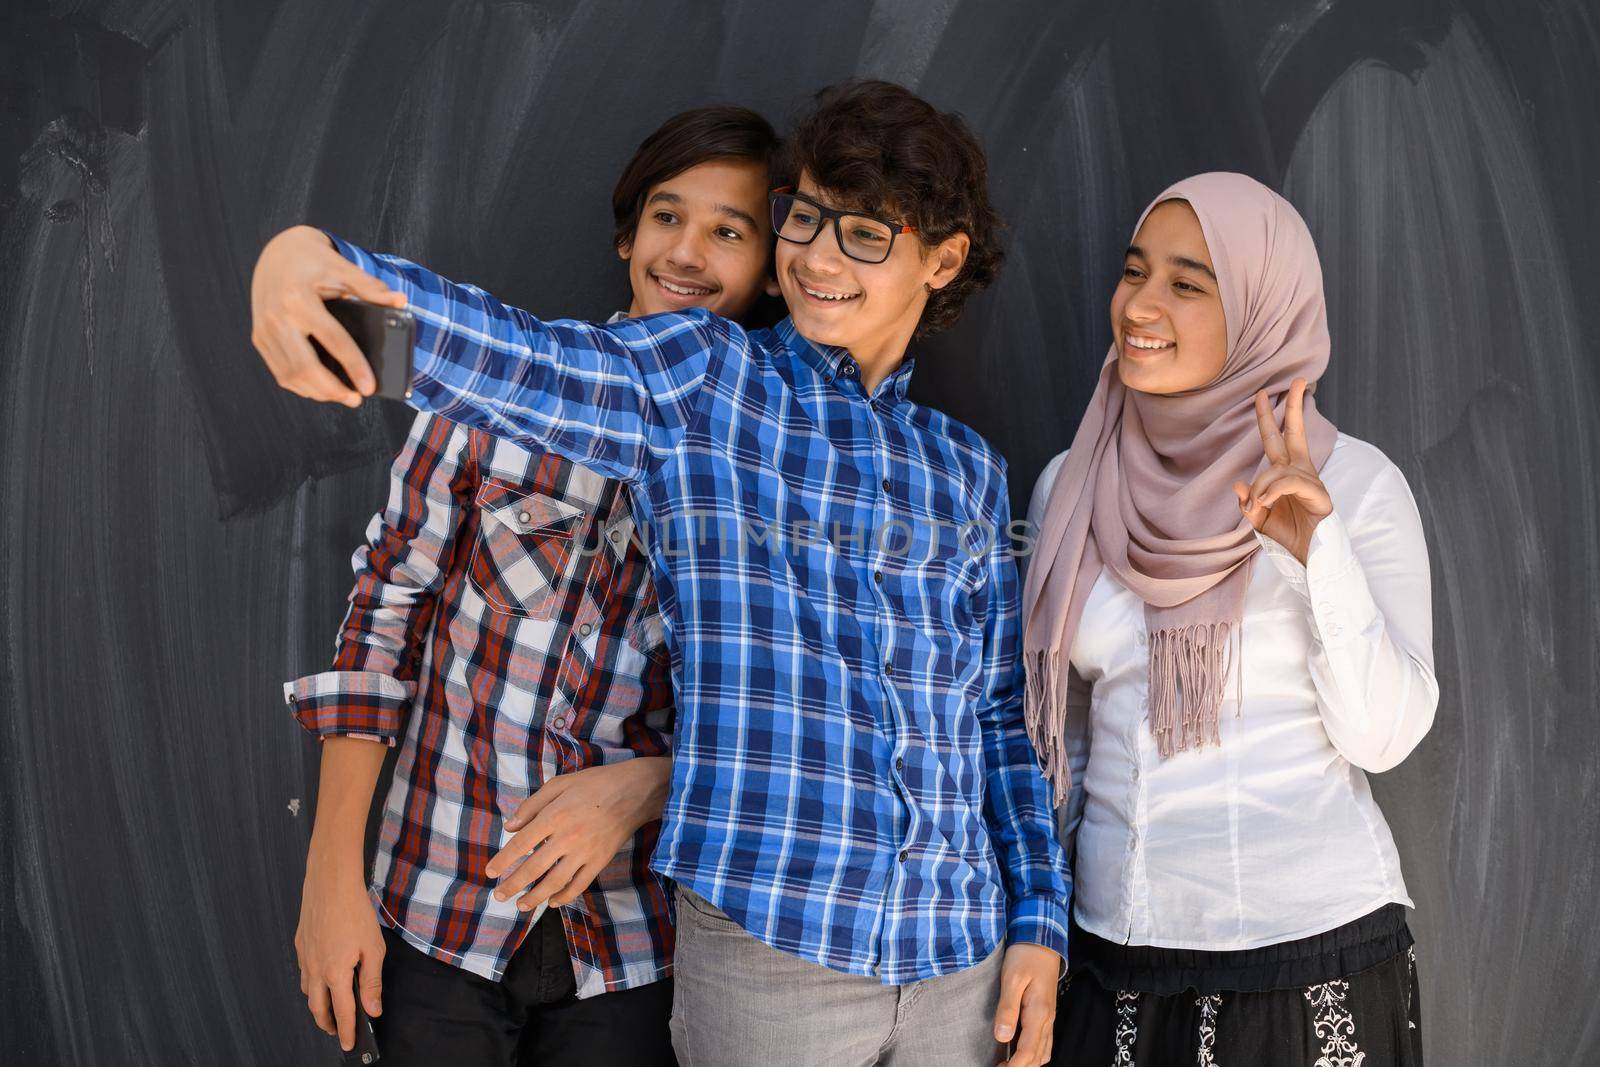 Group of Arab teens taking selfie photos on a smartphone with black chalkboard in the background. Selective focus. High quality photo